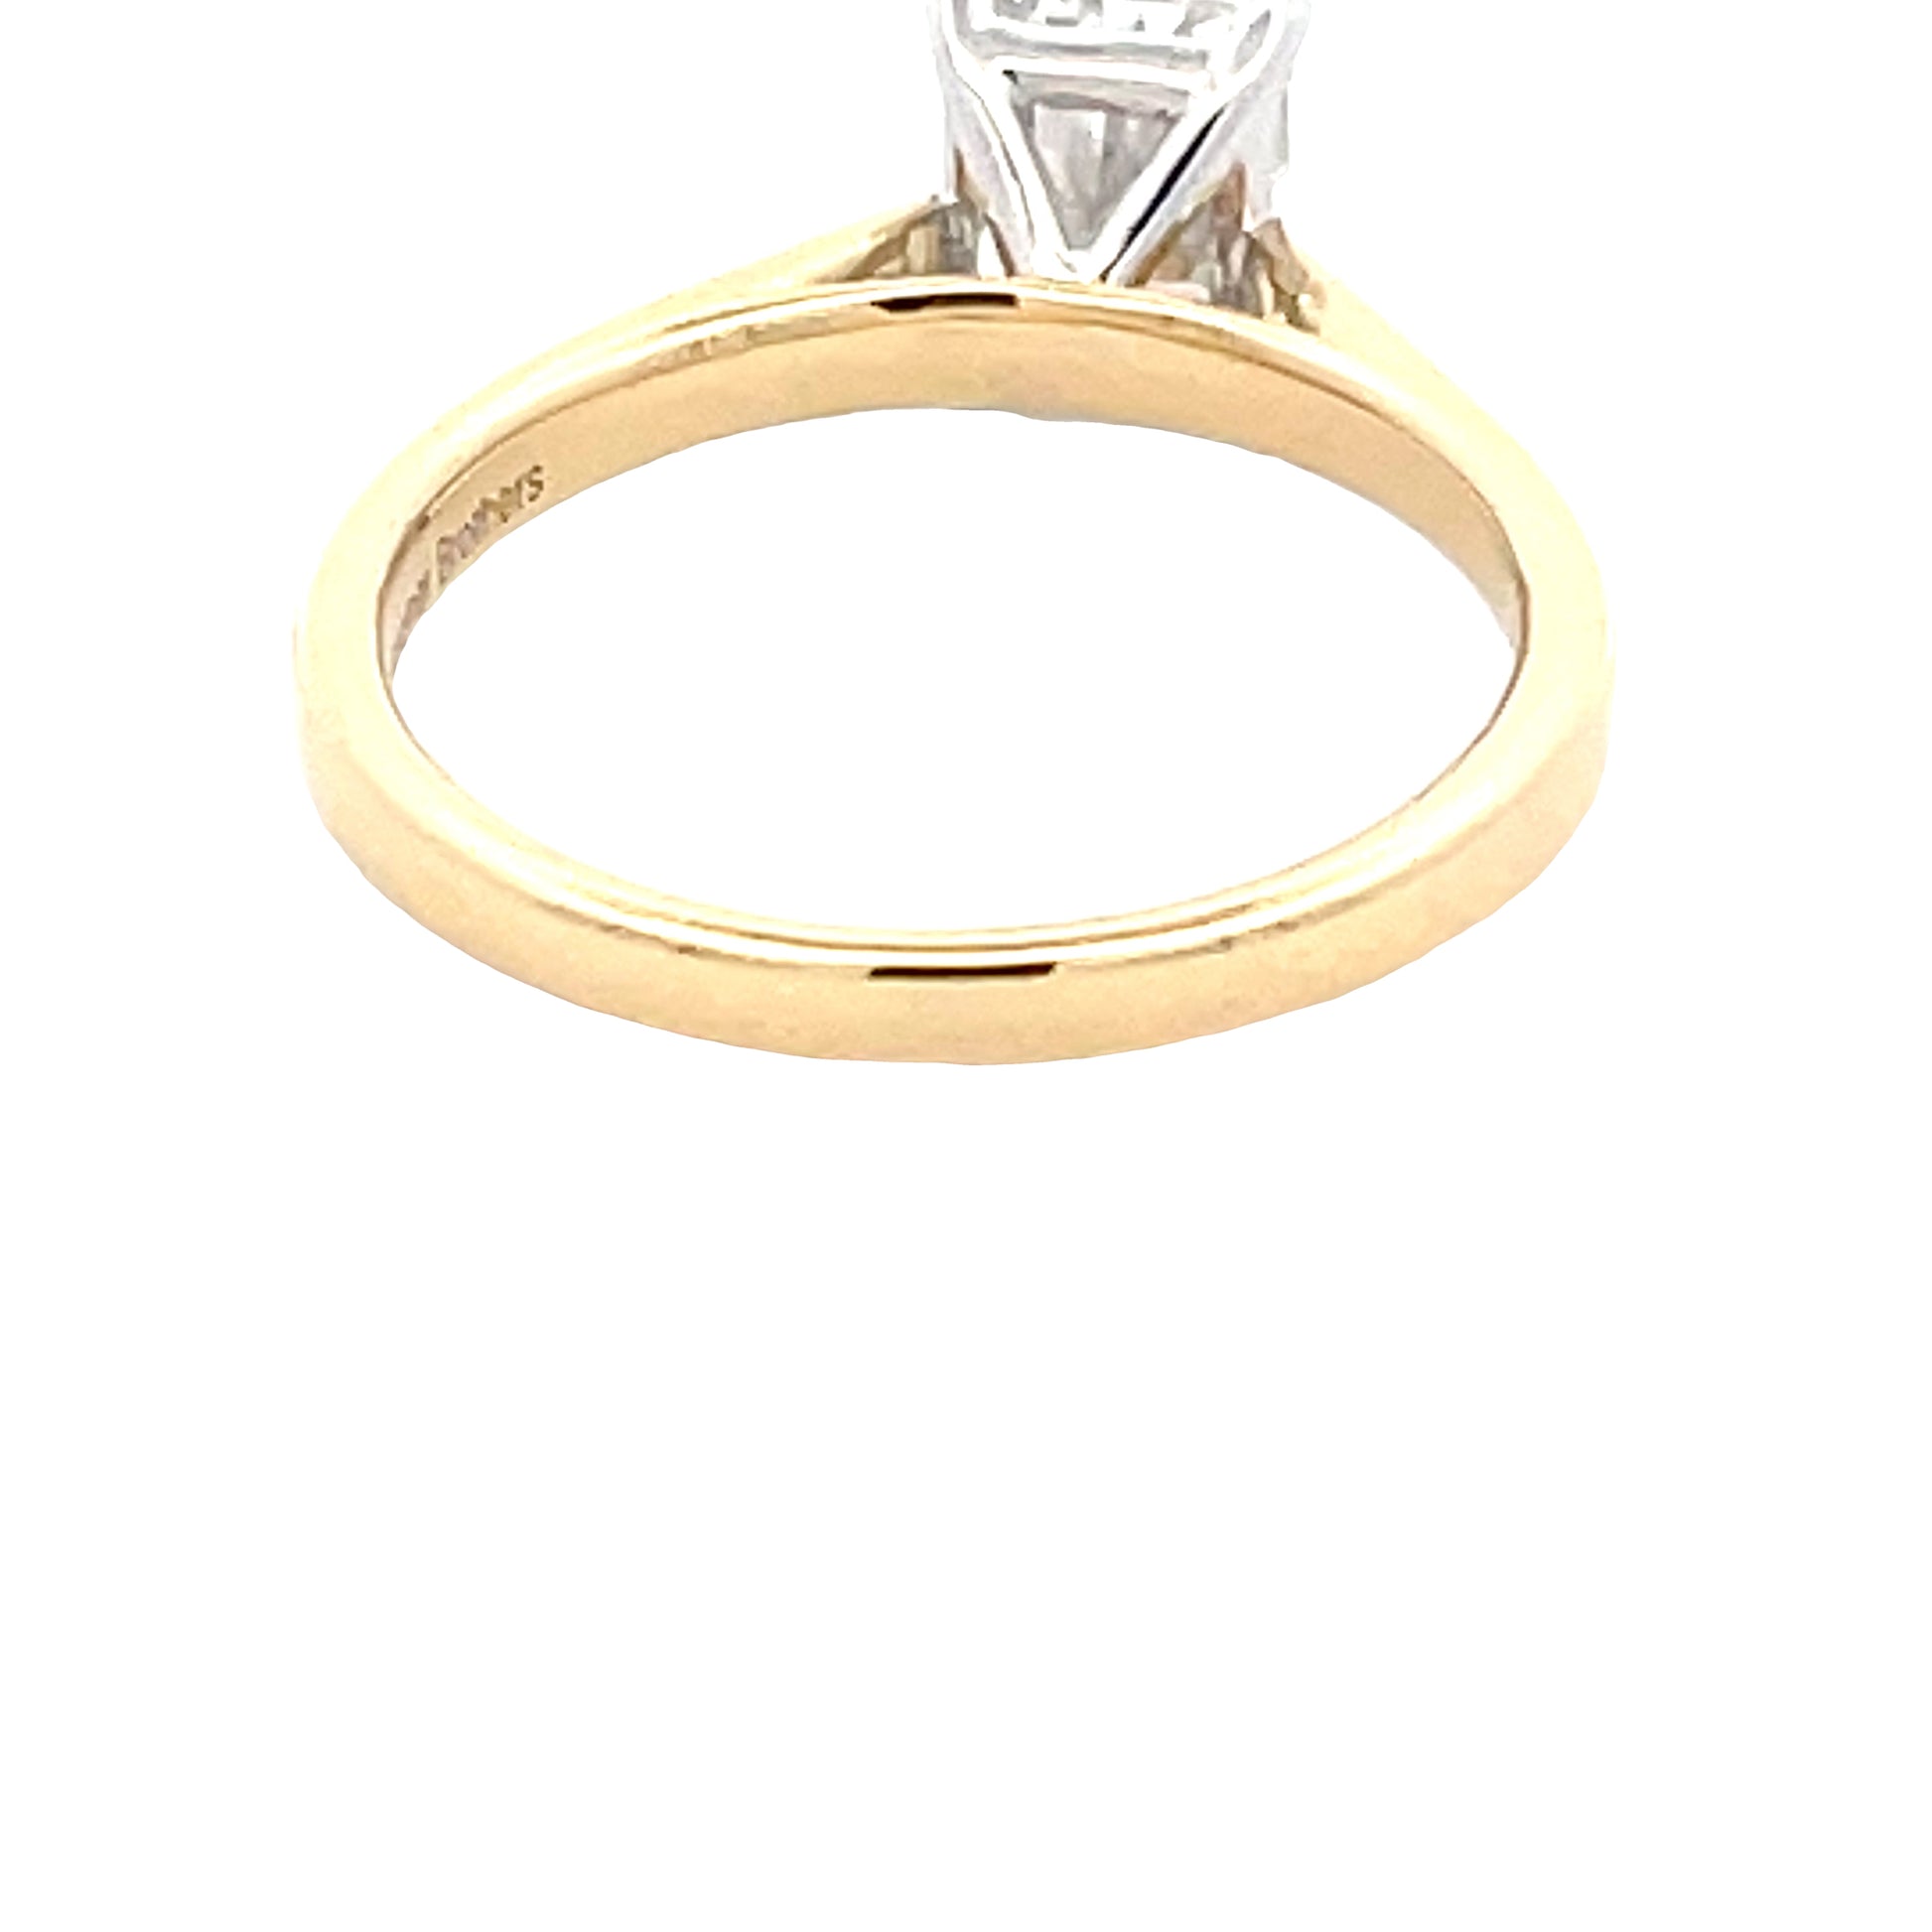 Lab Grown Radiant Cut Diamond Solitaire Ring - 1.21cts  Gardiner Brothers   